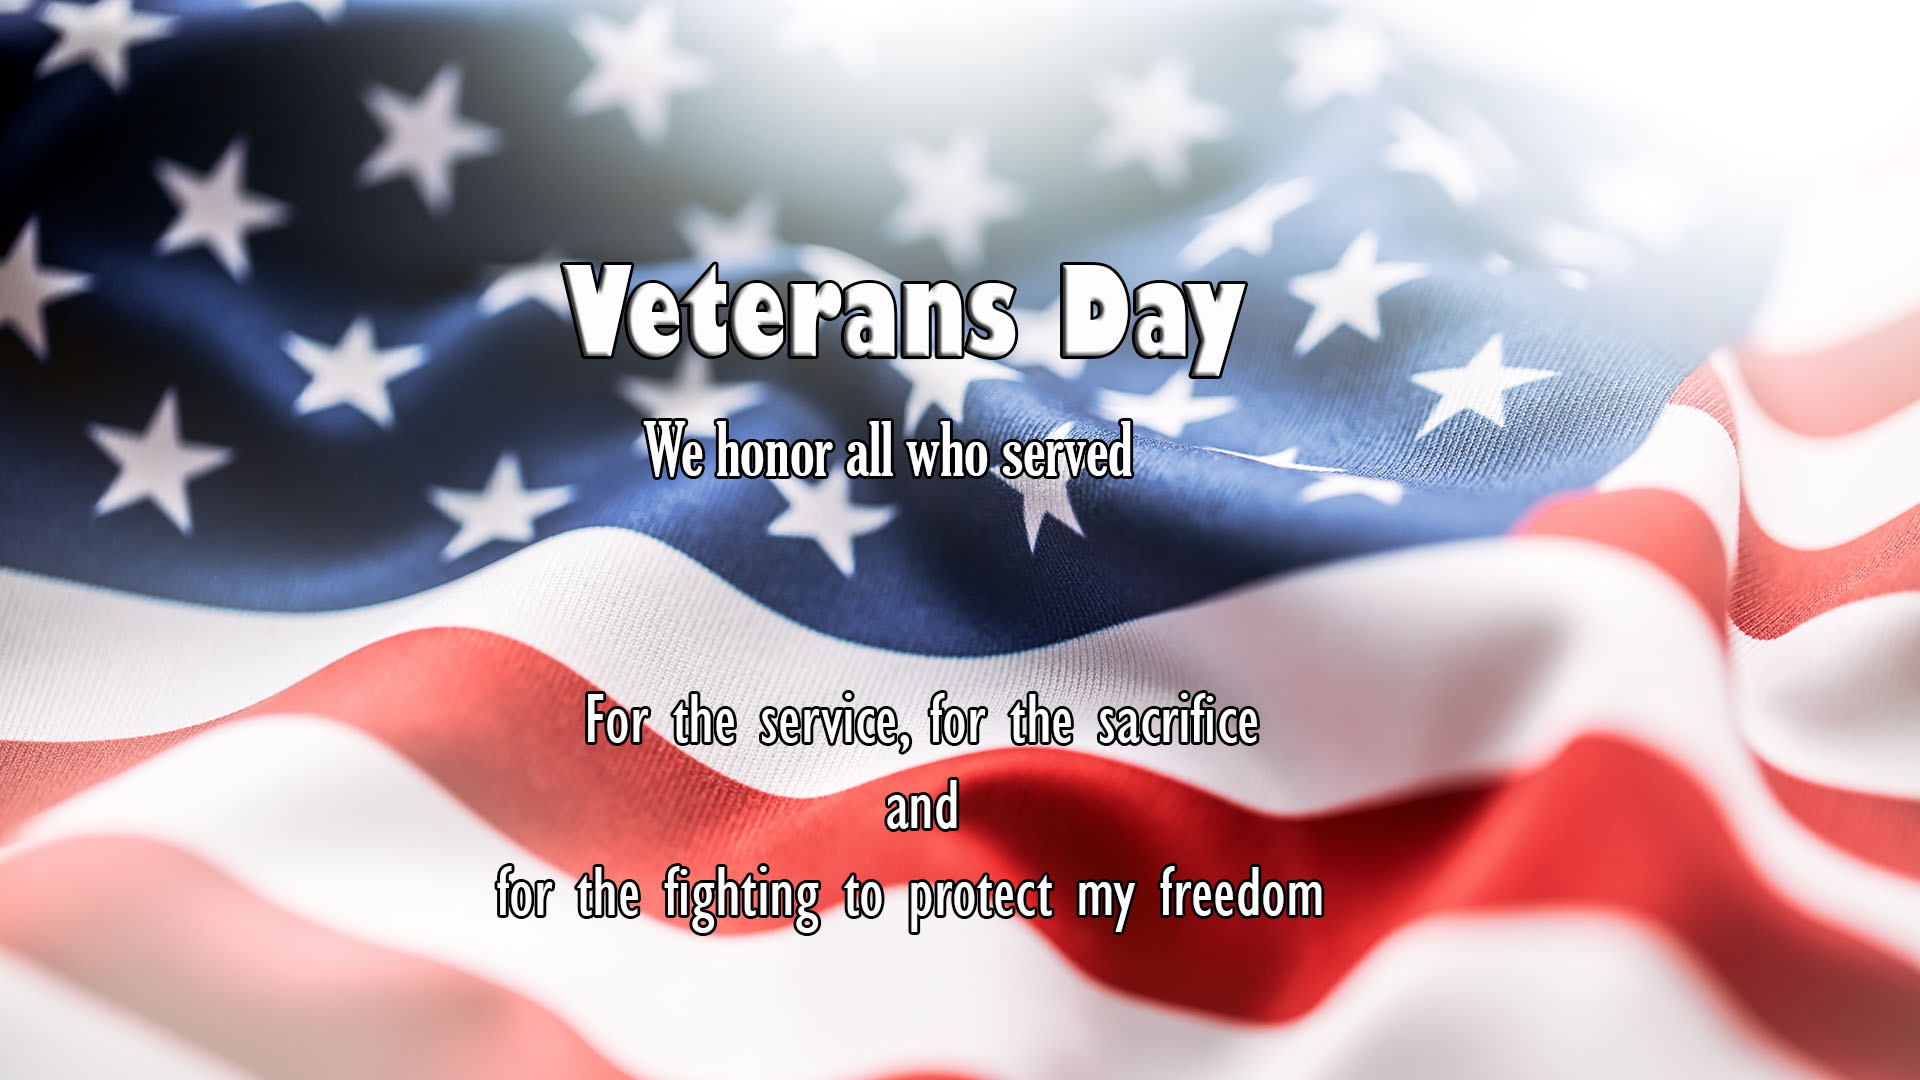 happy-veterans-day-hd-wallpapers-images-quotes-wishes-cards-2017